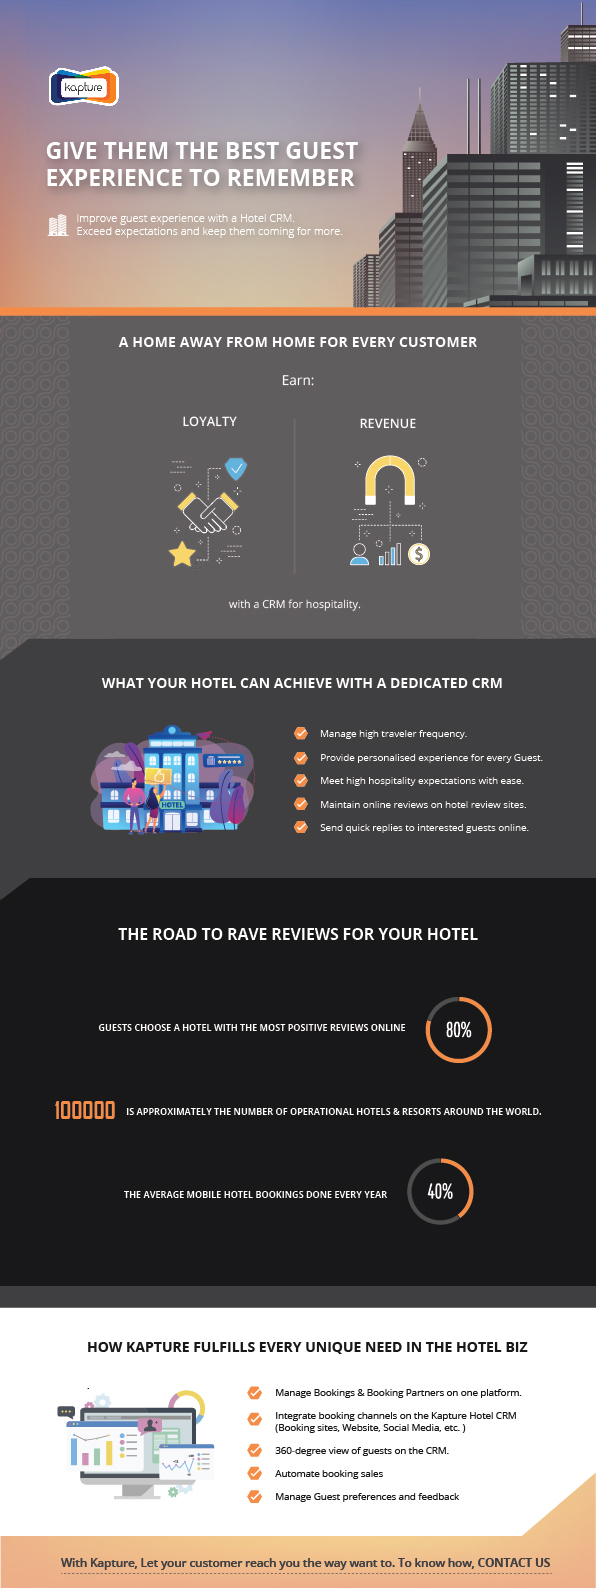 A hotel crm helps earn loyalty and revenue. Find out how kapture hotel crm helps provide the best experience to guests in this infographic.